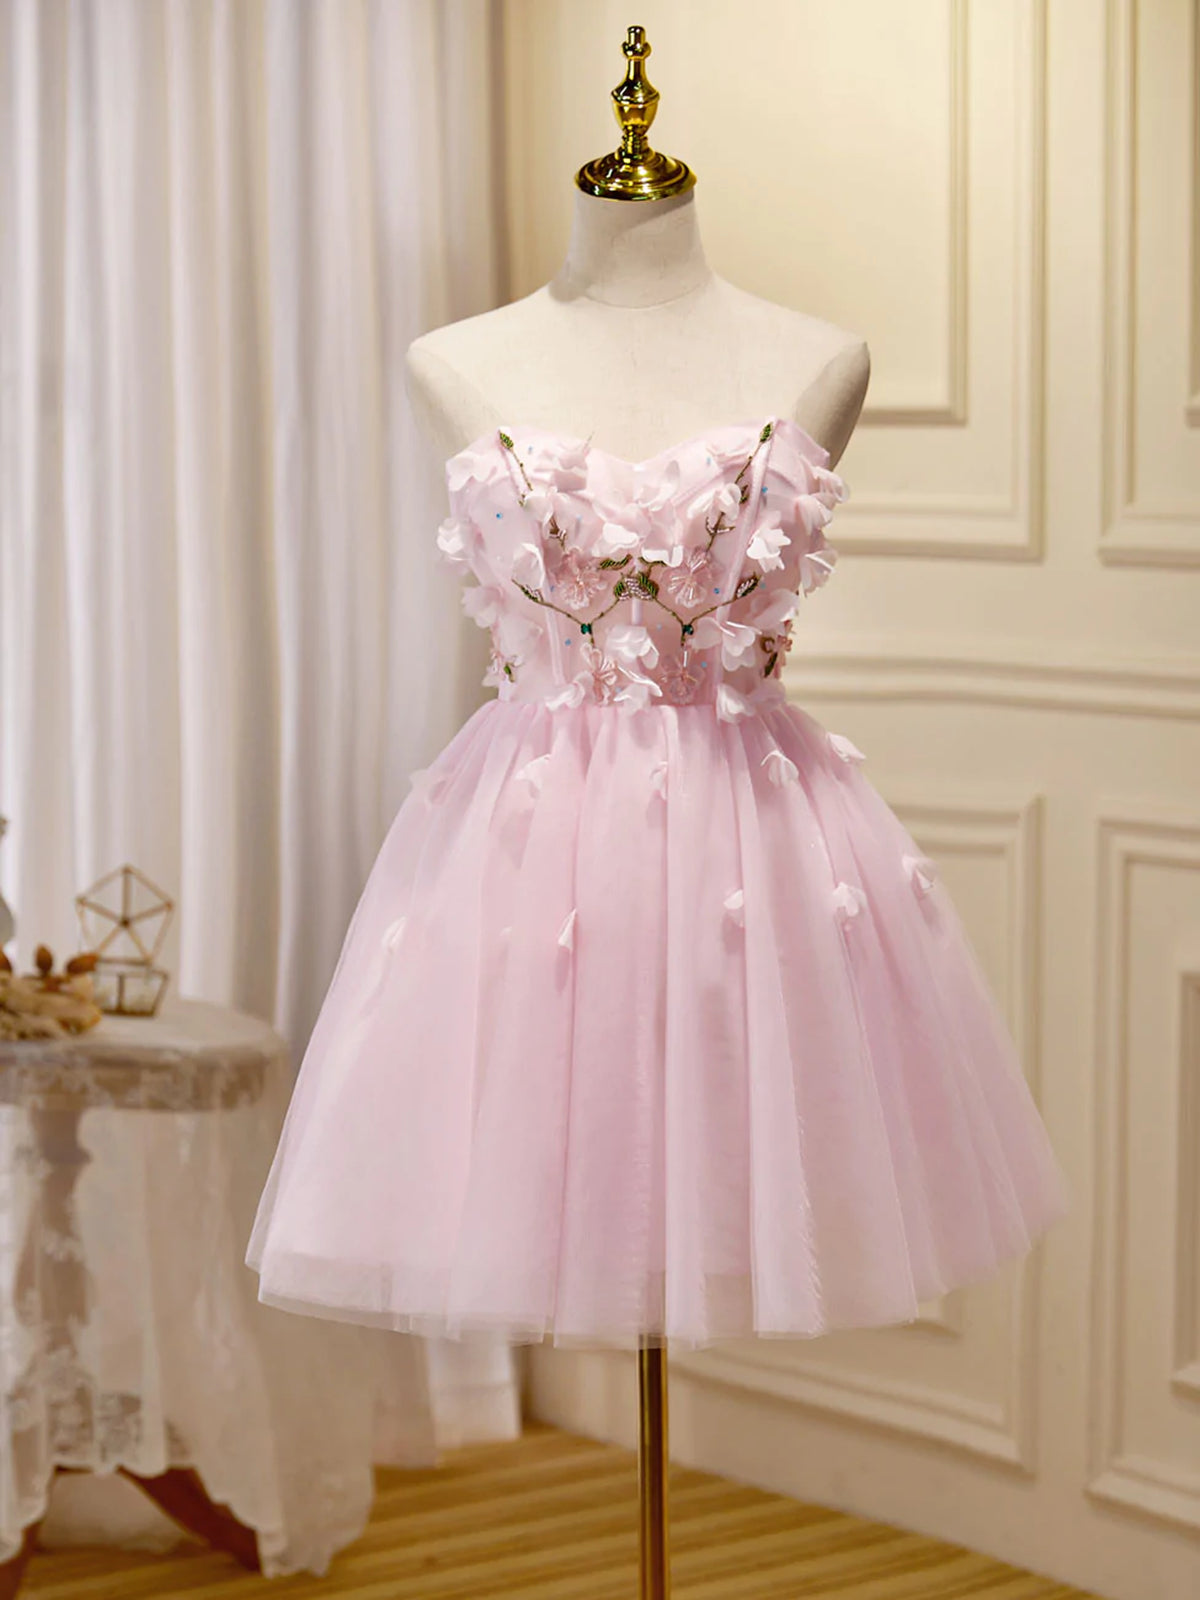 Party Dresses Ideas, Short Pink Floral Prom Dresses, Short Pink Floral Formal Homecoming Dresses